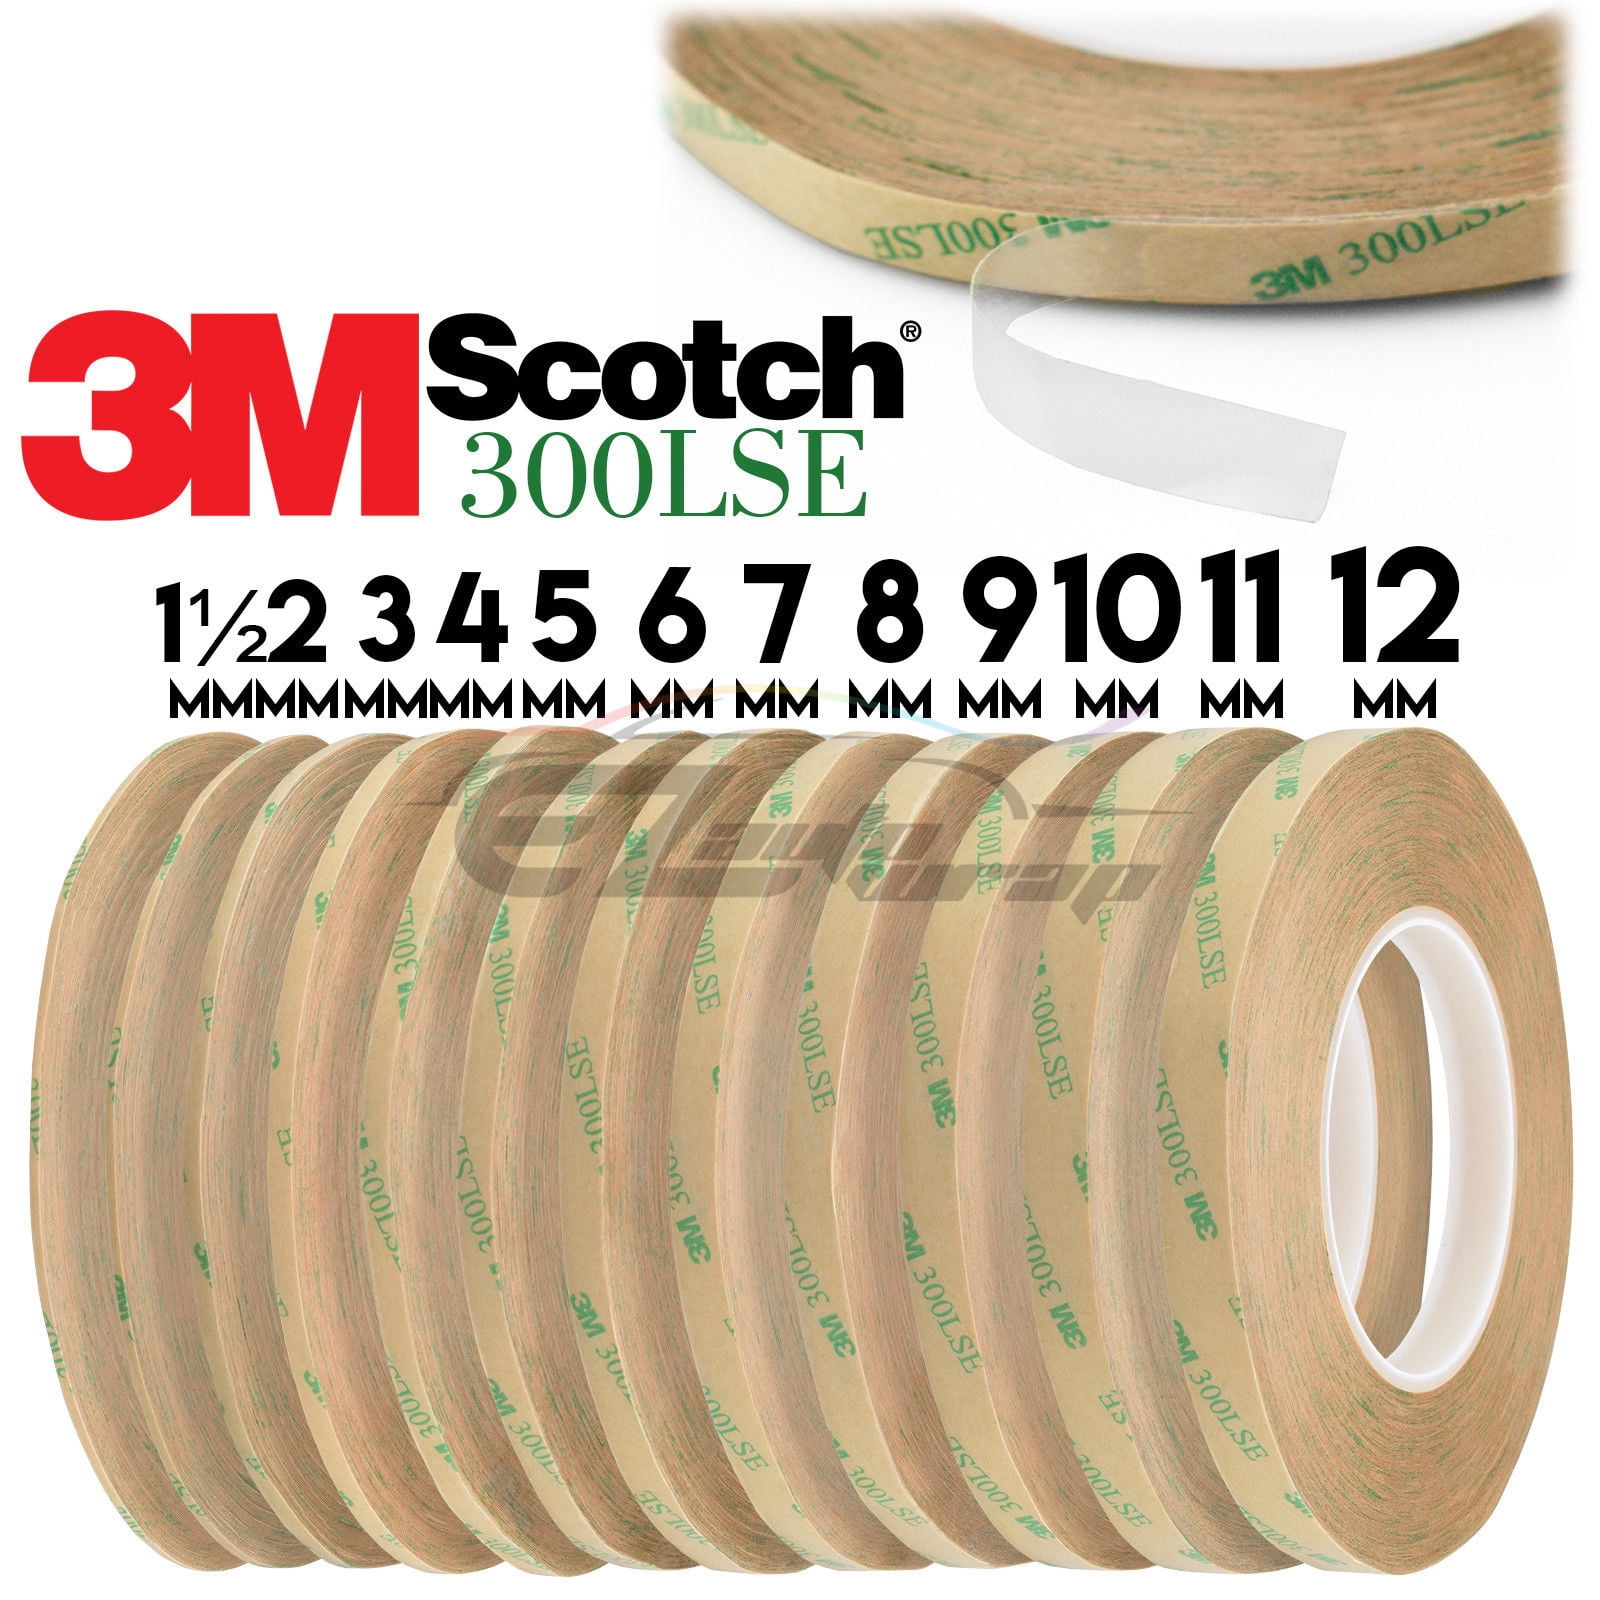 Genuine 3m 300lse 1 5mm Double Sided Tape Heavy Duty Cell Phone Repair 180ft Long Roll For Iphone Android Galaxy Tablet Lcd Glass Bezel Frame Walmart Com Walmart Com